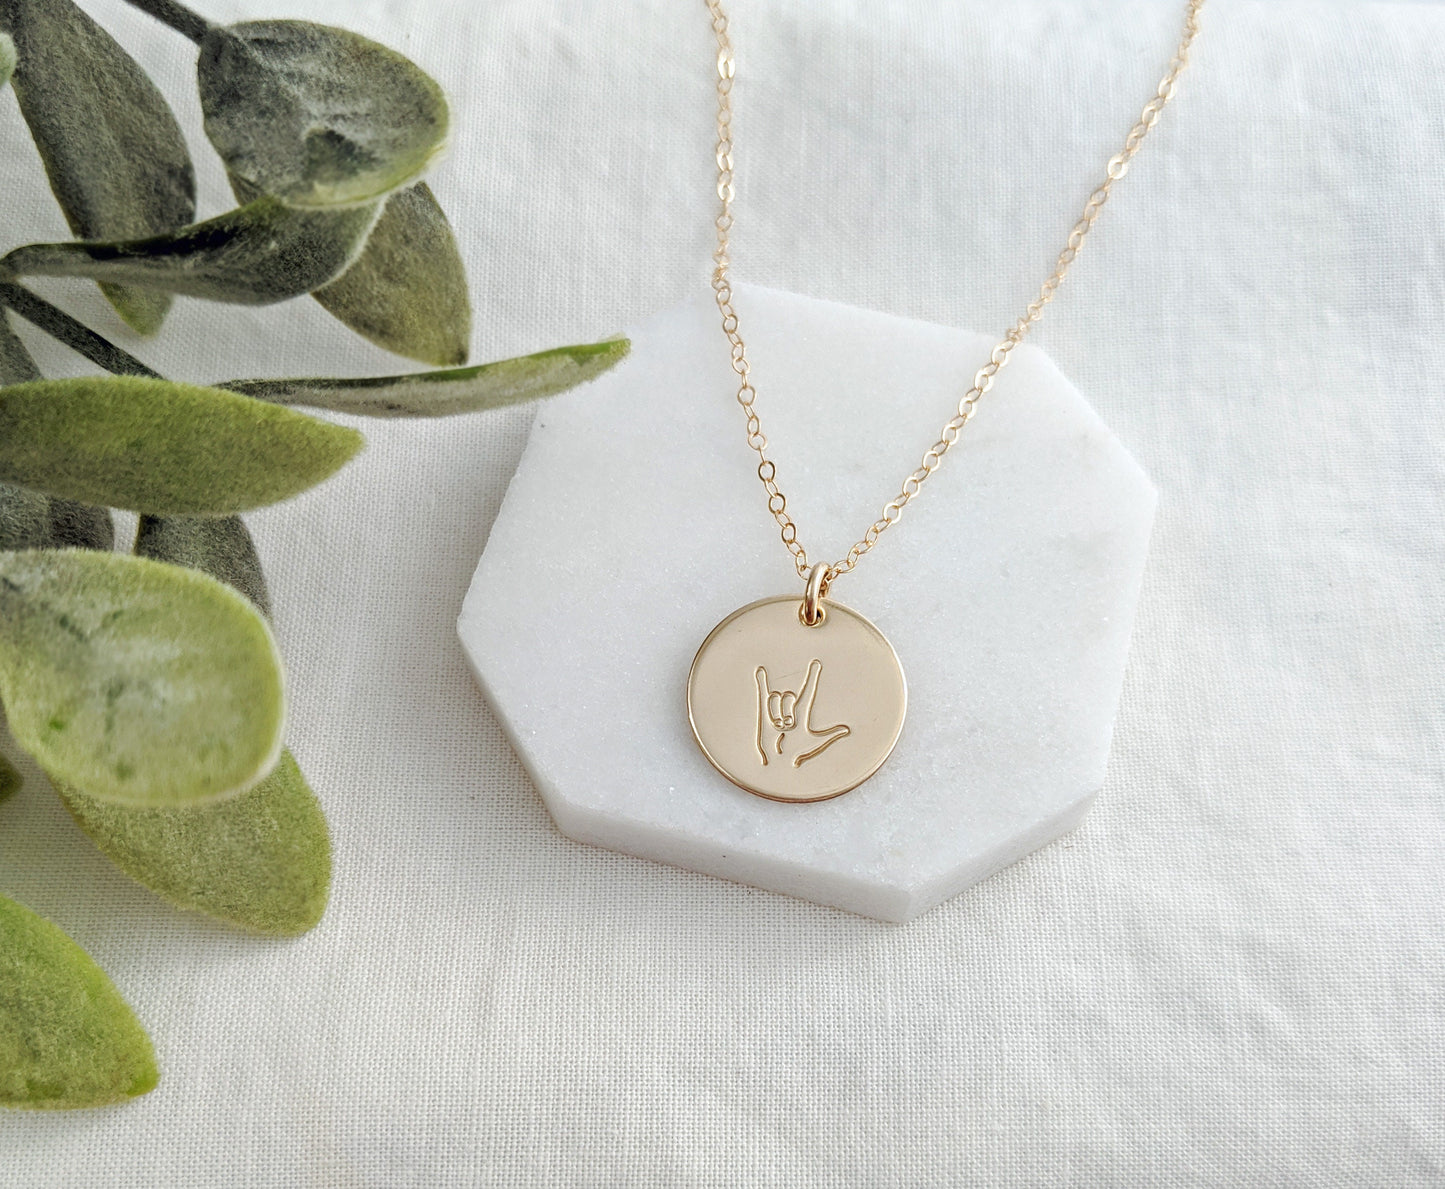 I Love You ASL Sign Necklaces For Besties & Sisters | ASL Jewelry | Gift Idea